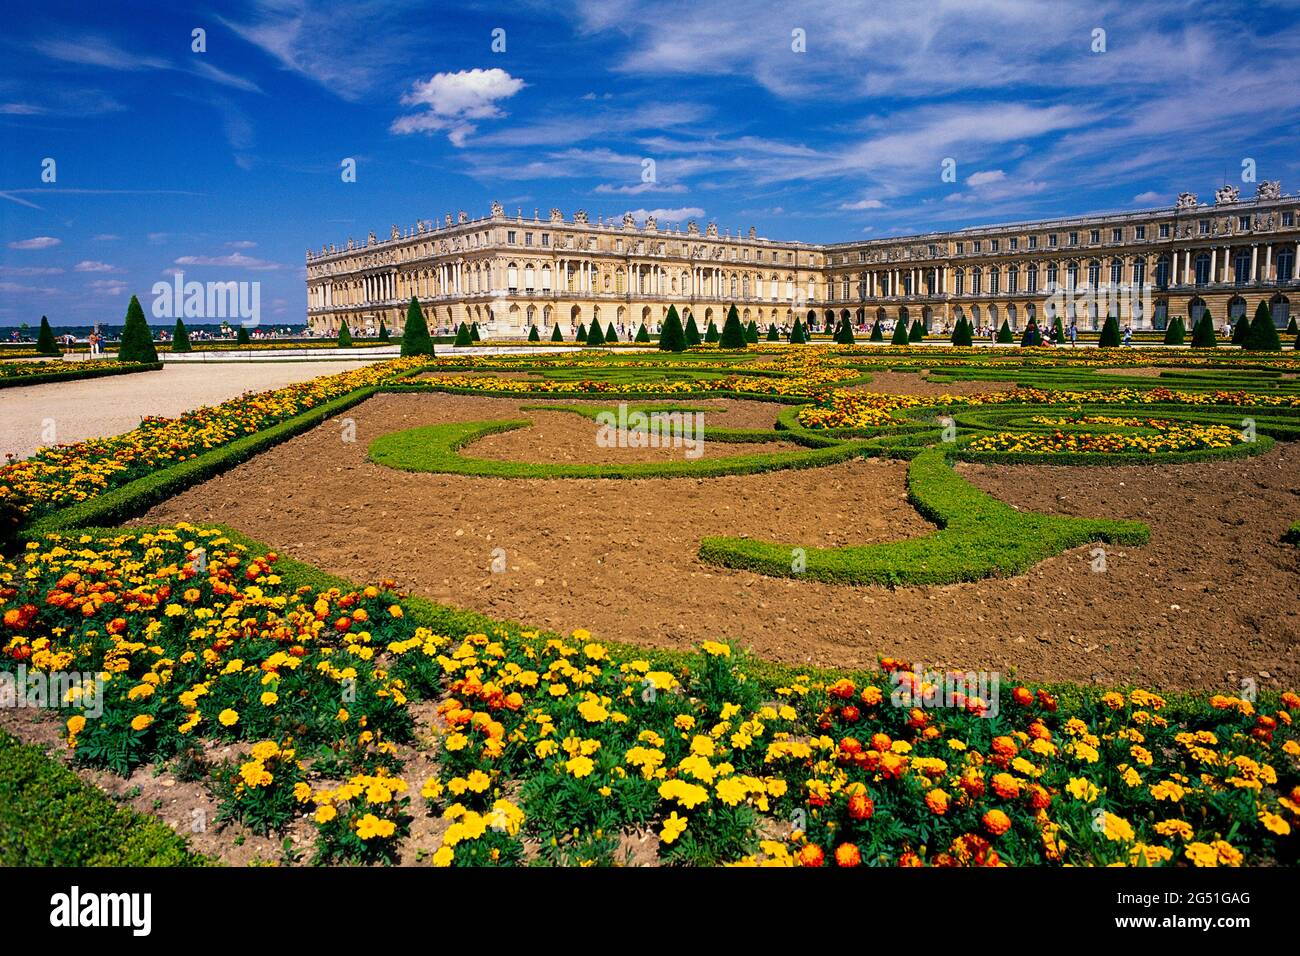 Formal garden outside of Palace of Versailles, Ile-de-France, France Stock Photo